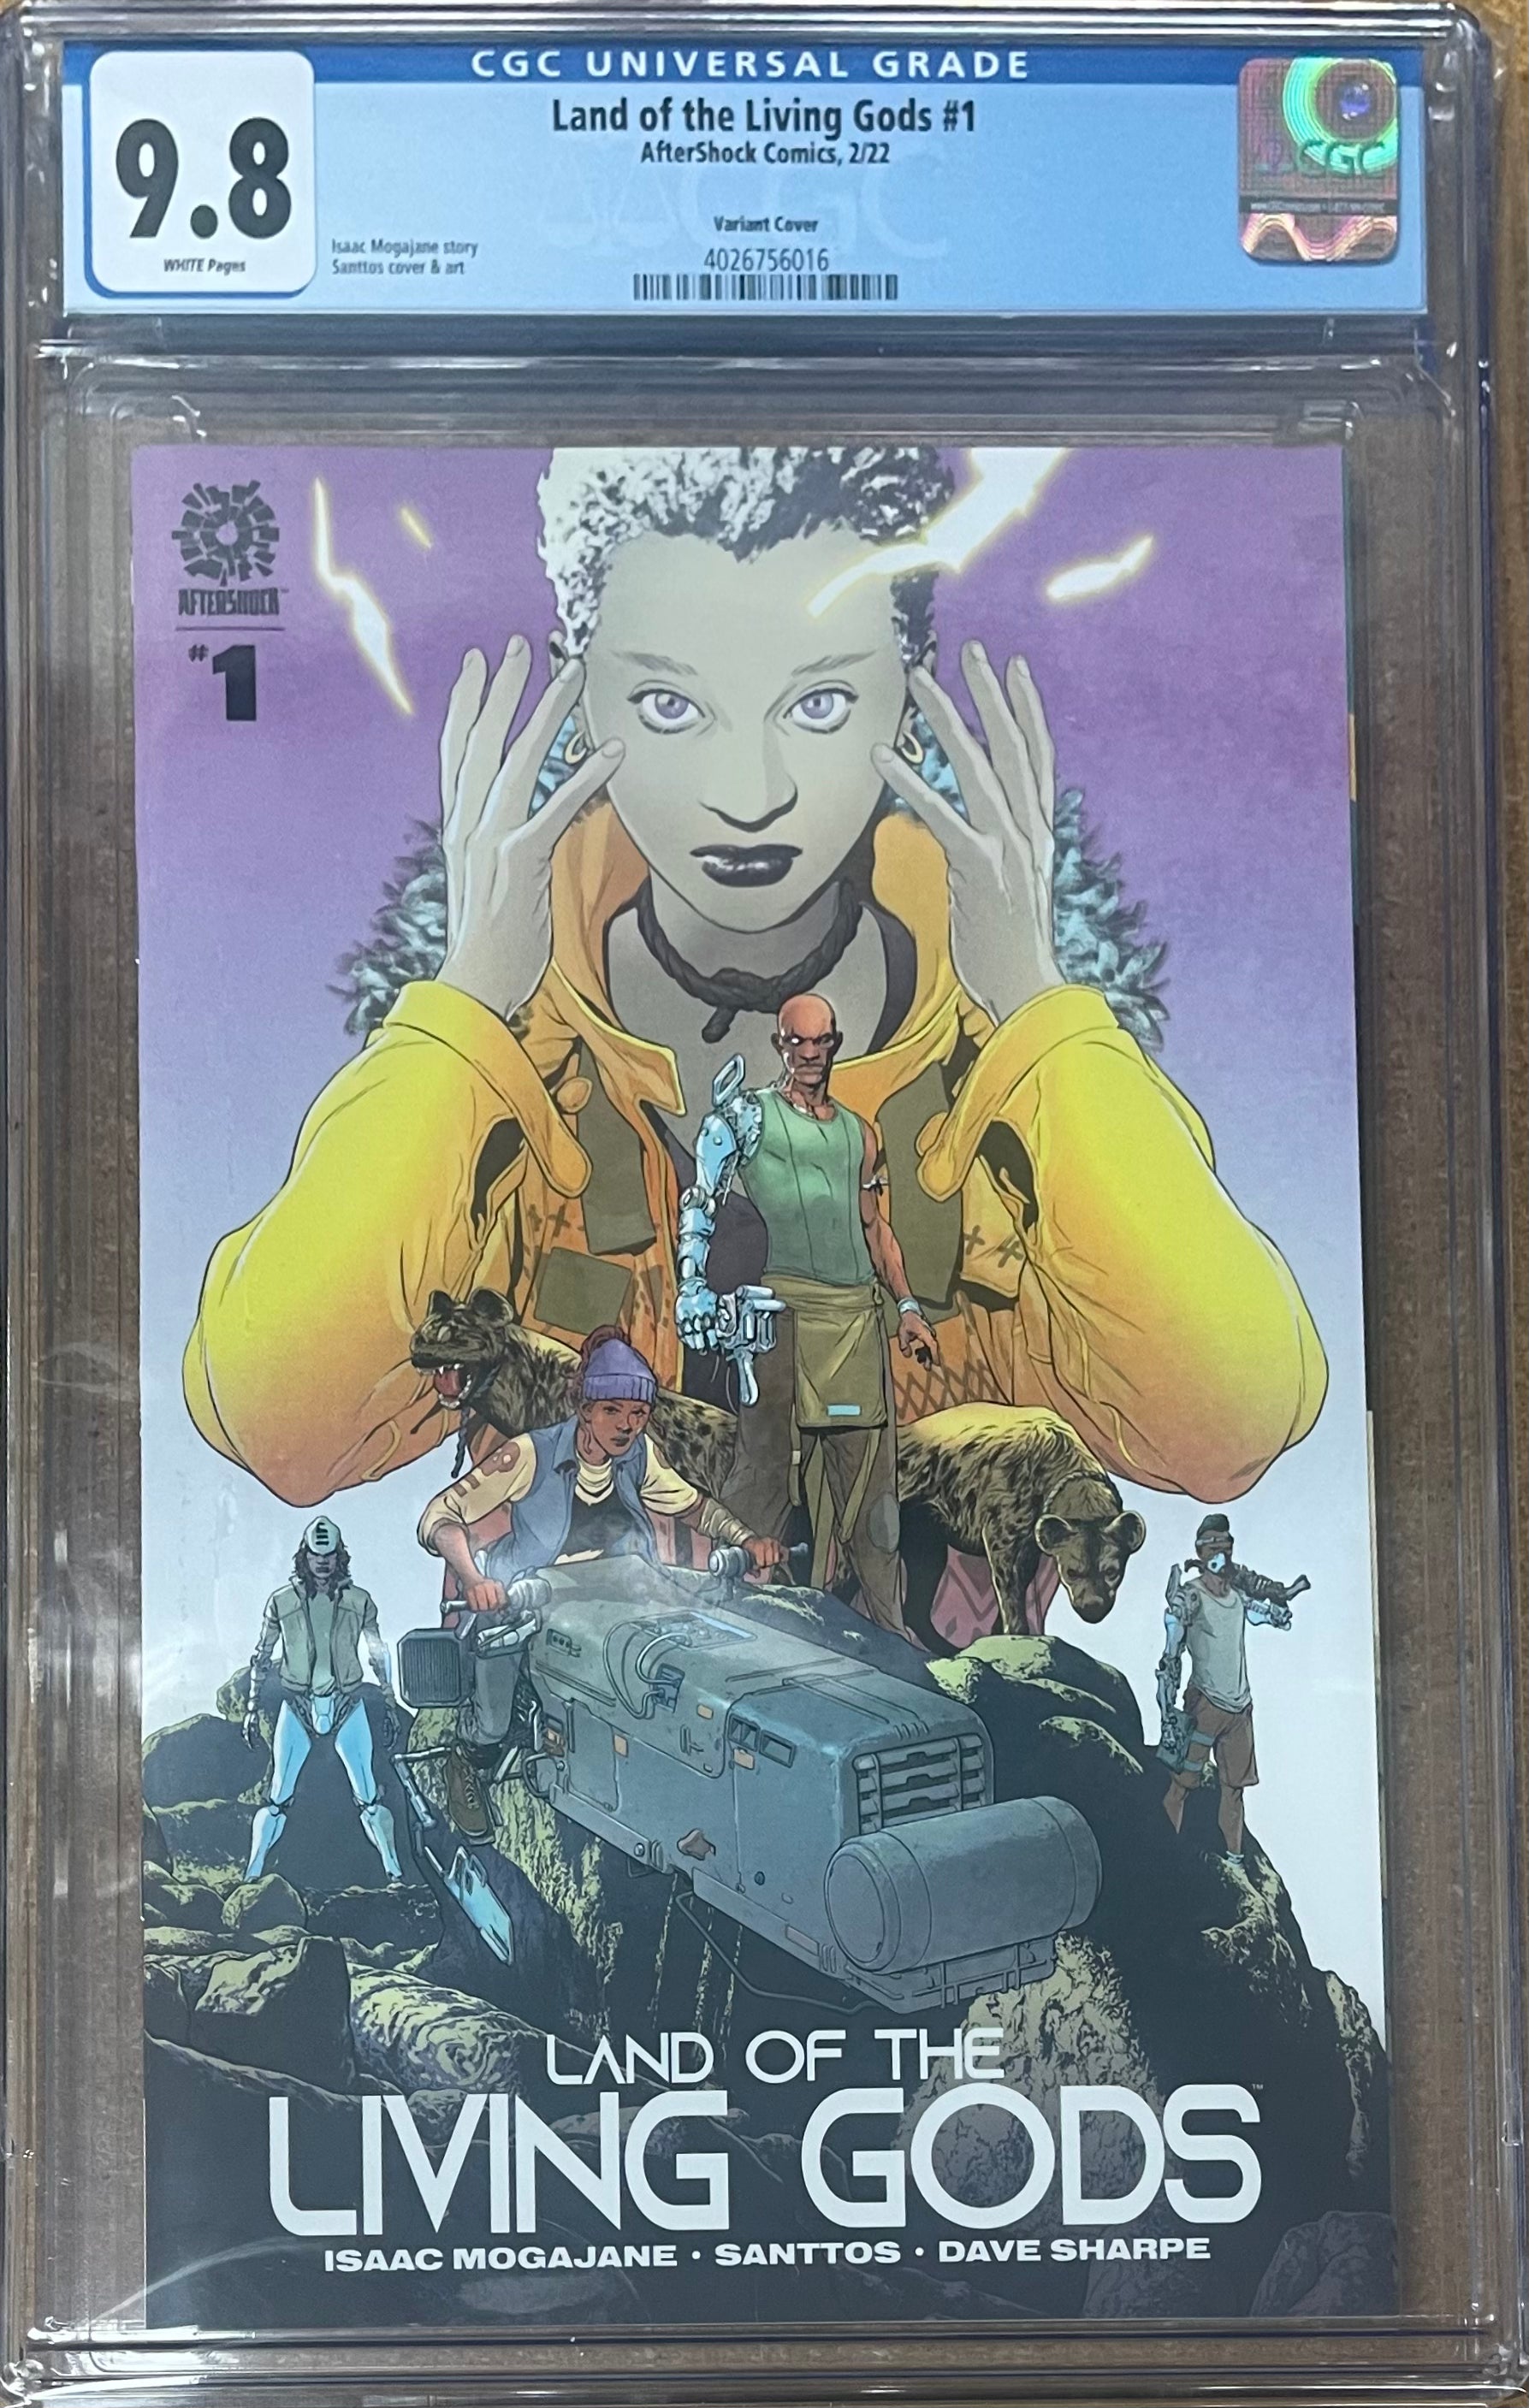 LAND OF THE LIVING GODS #1 VARIANT COVER CGC 9.8